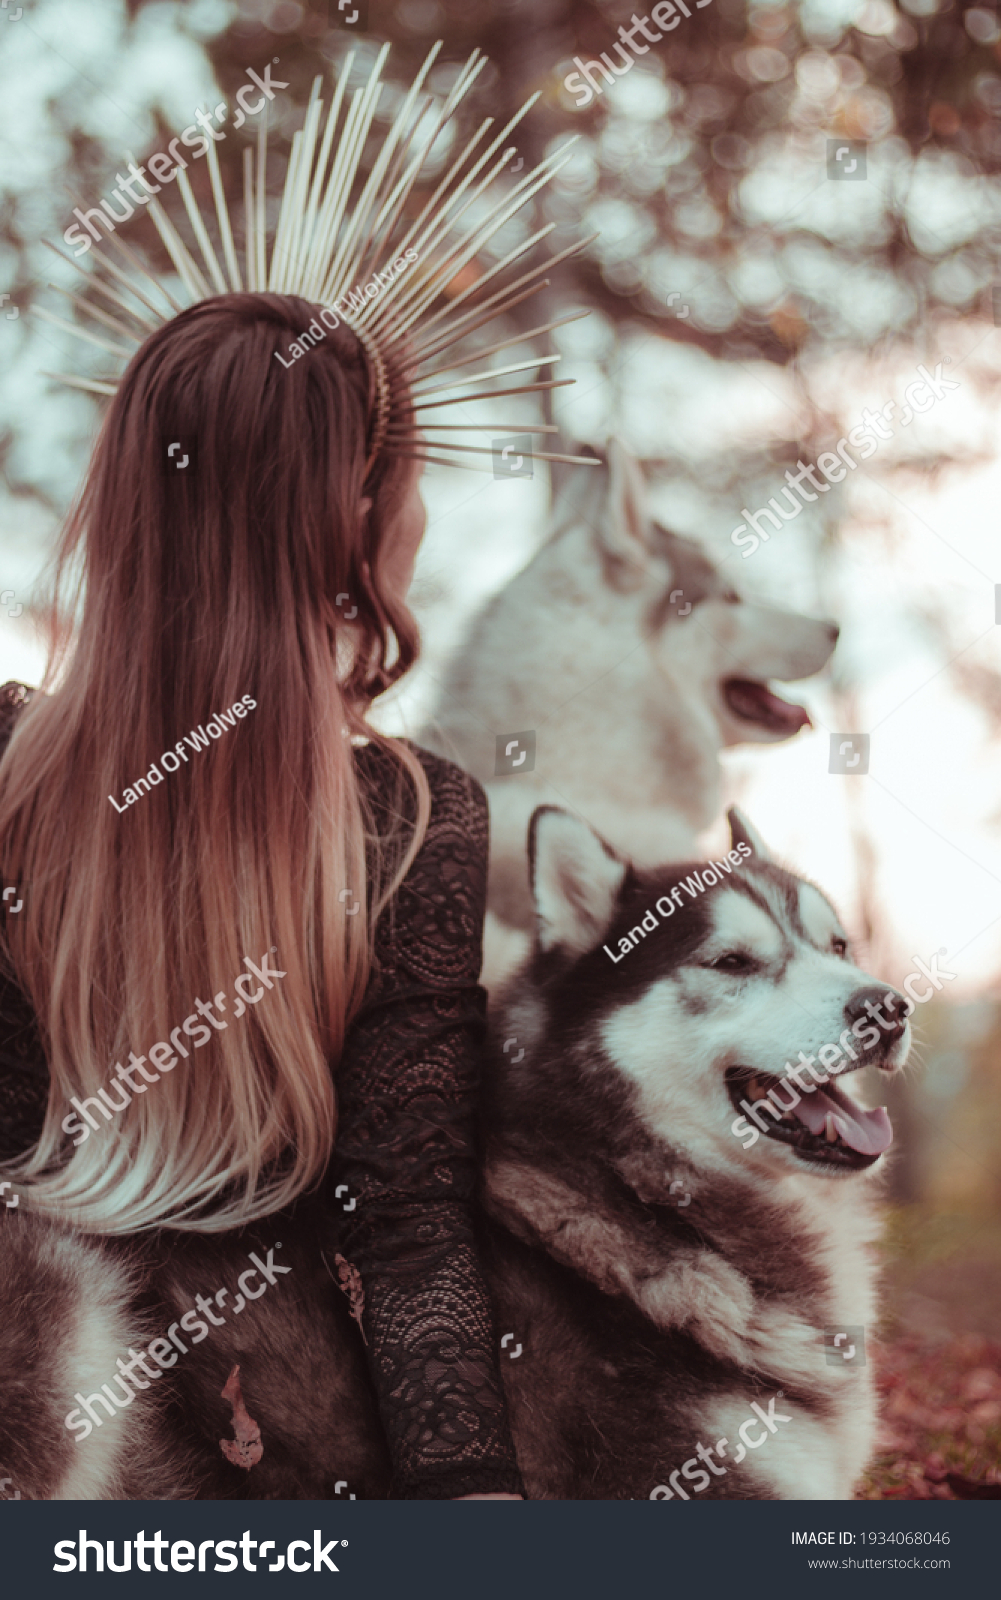 Together With The Wolf Girl